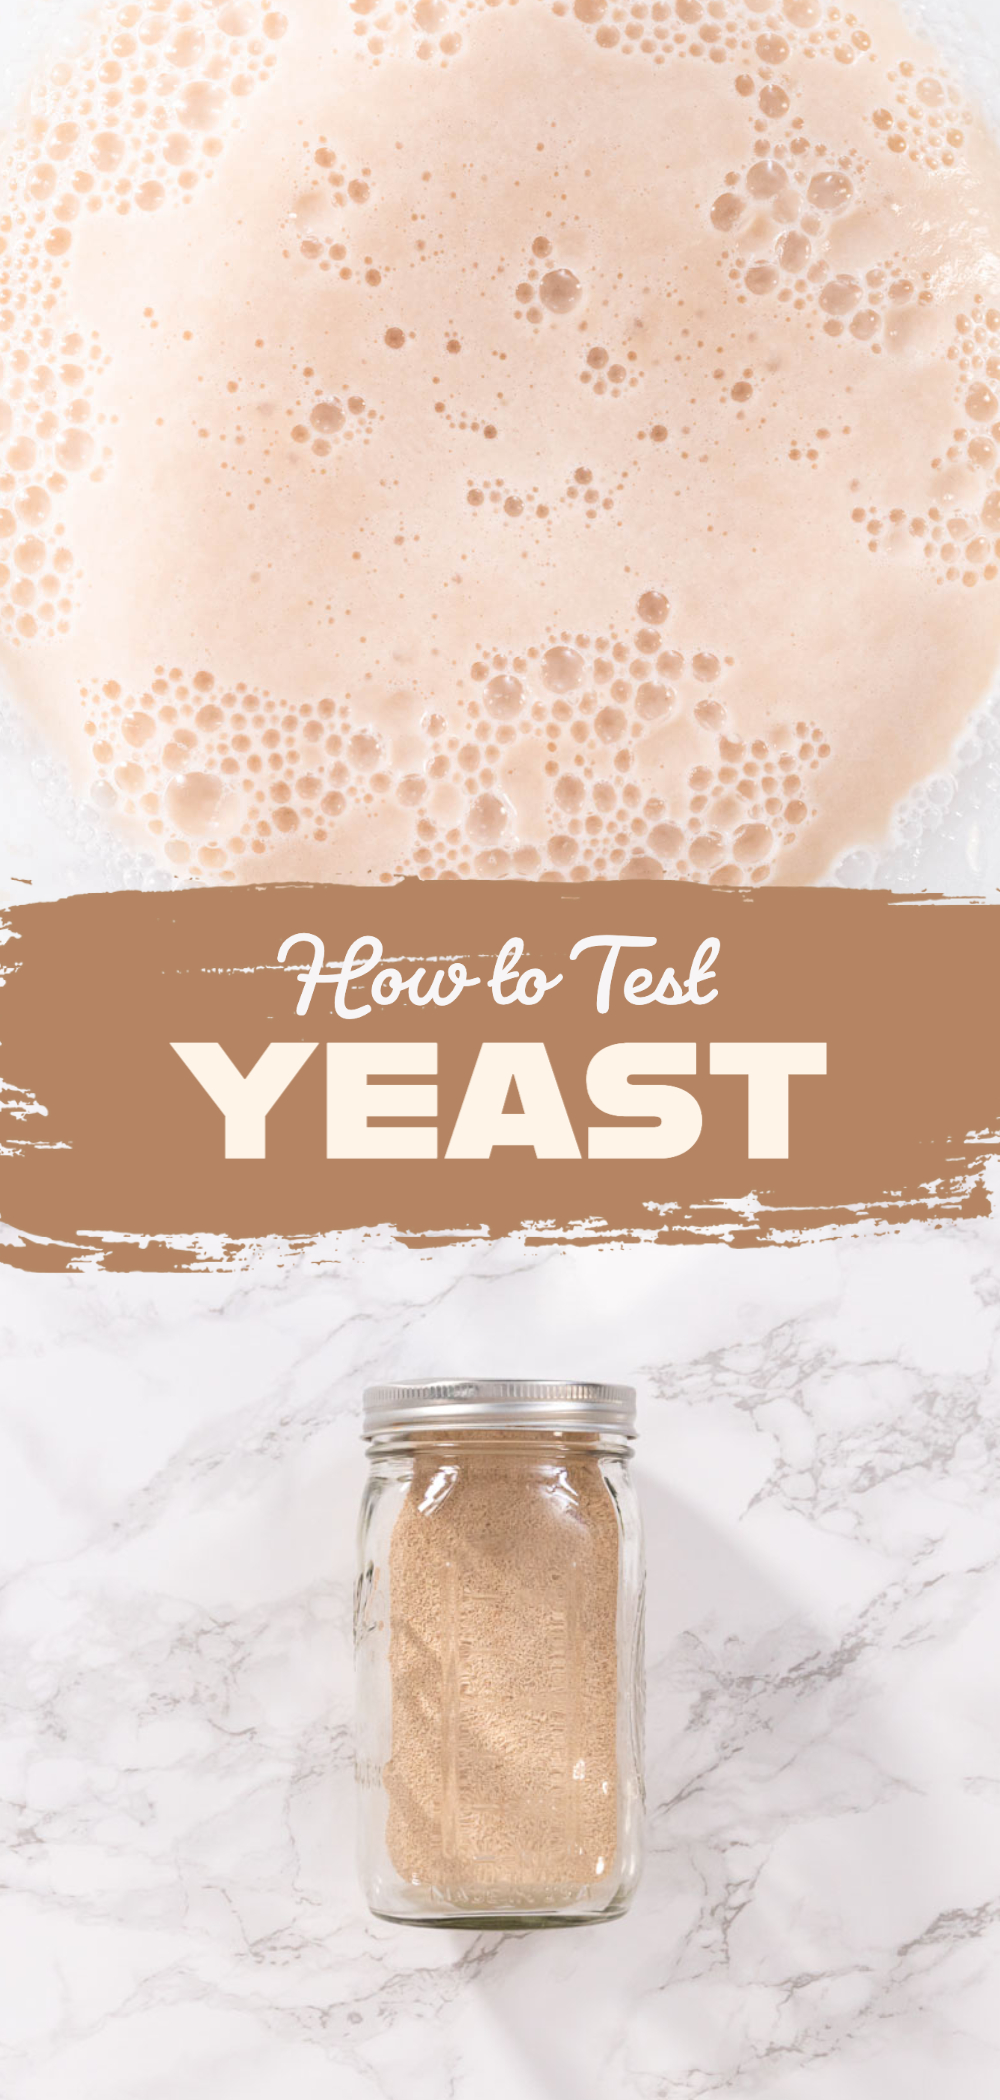 How to test yeast